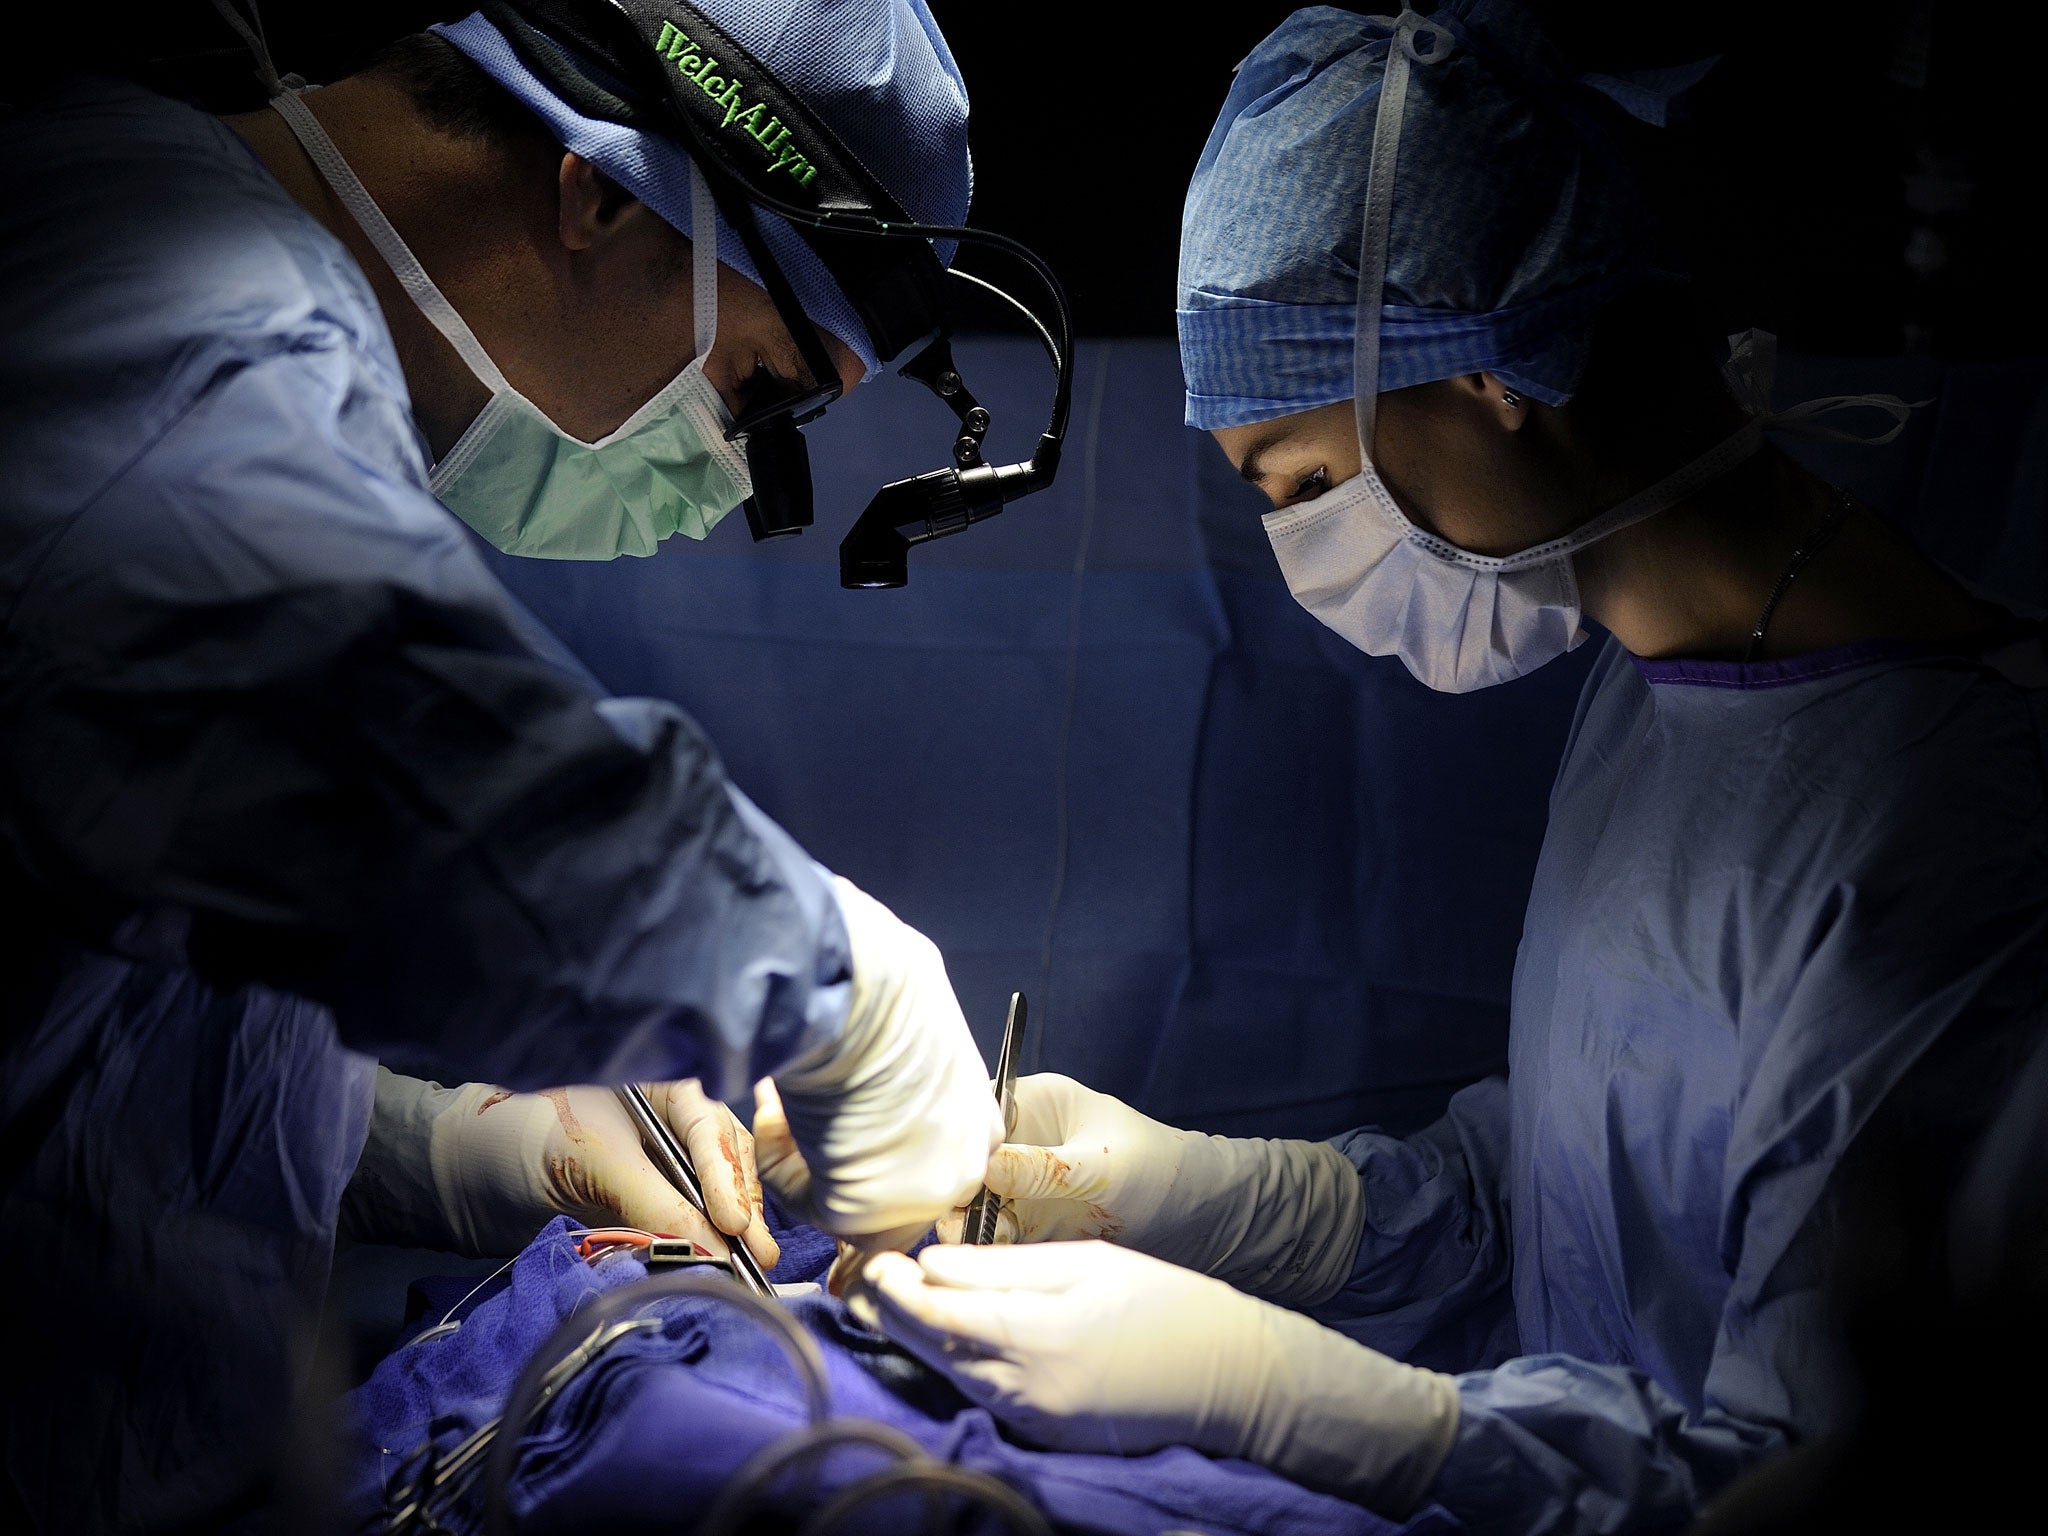 Surgeons, unrelated to the kidney transplant, perform an operation